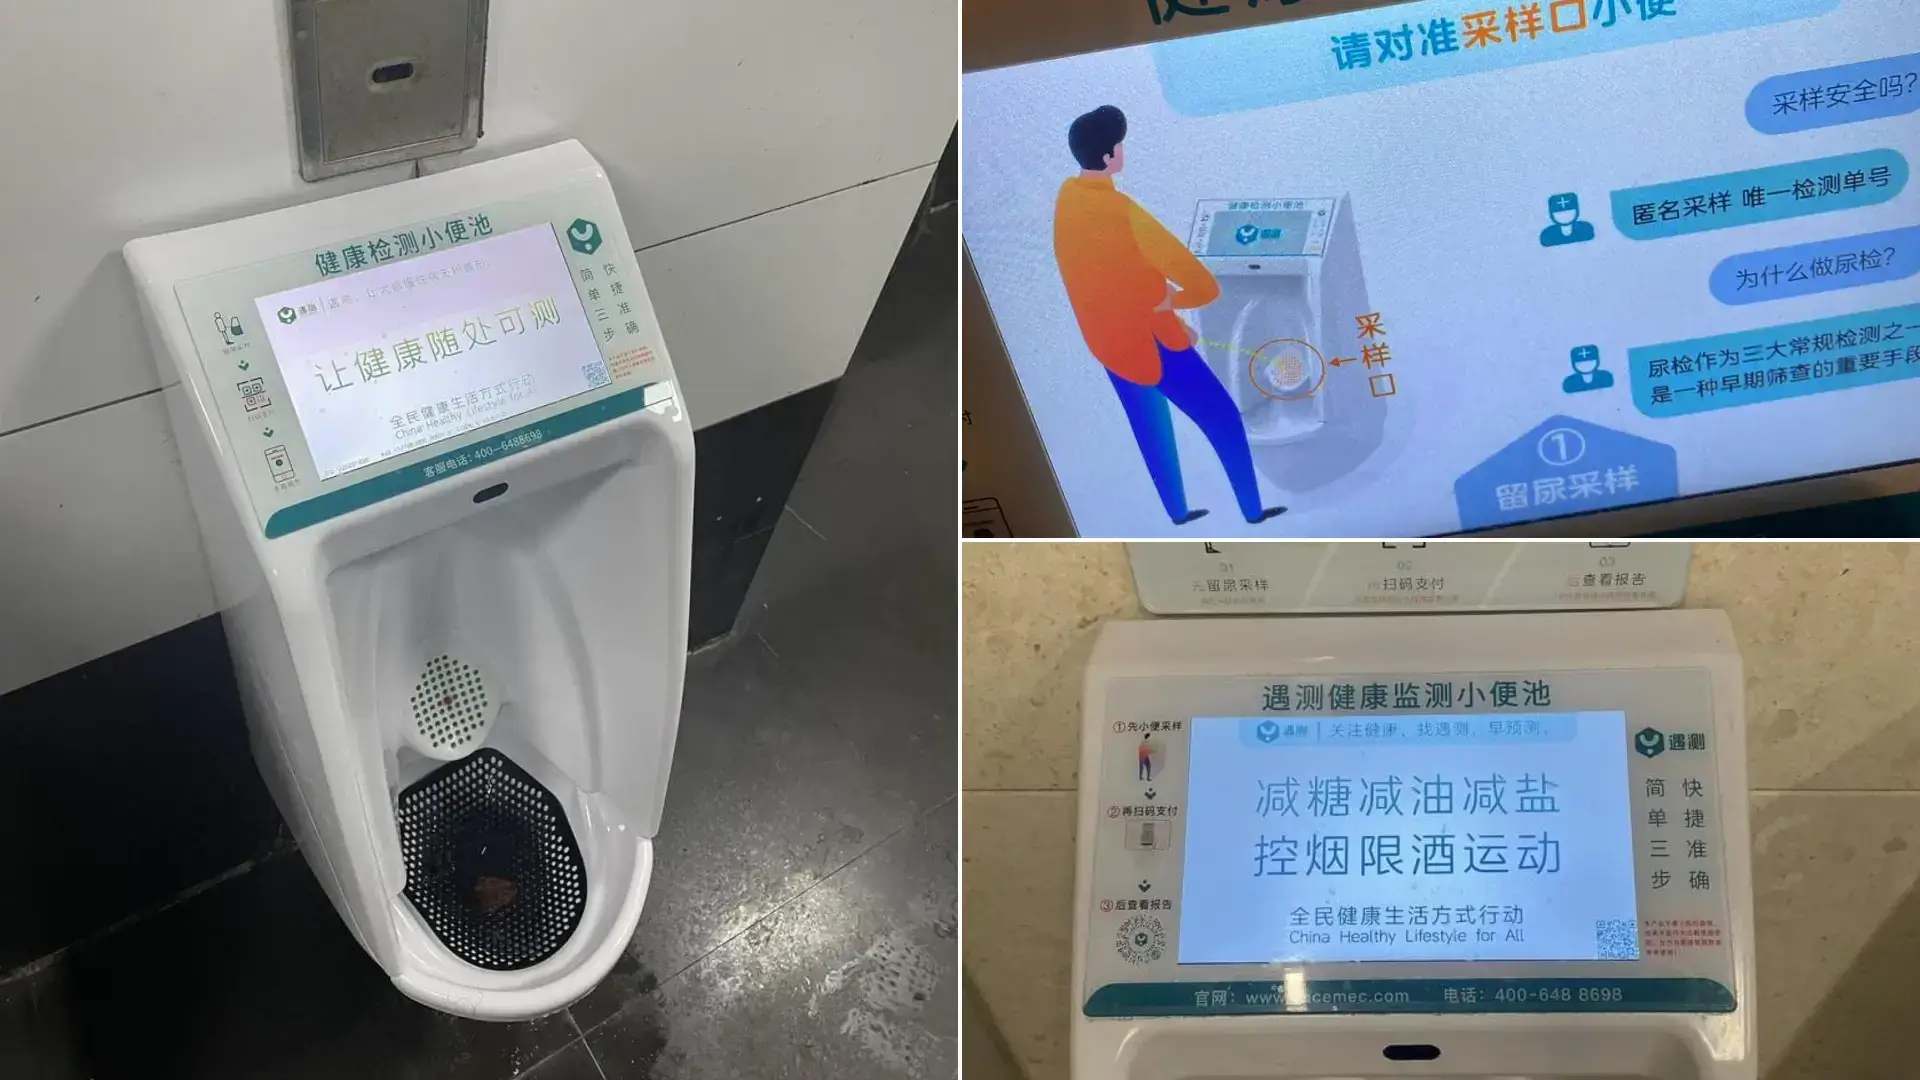 Public Toilets In China Are Now Scanning Urine For Health Problems